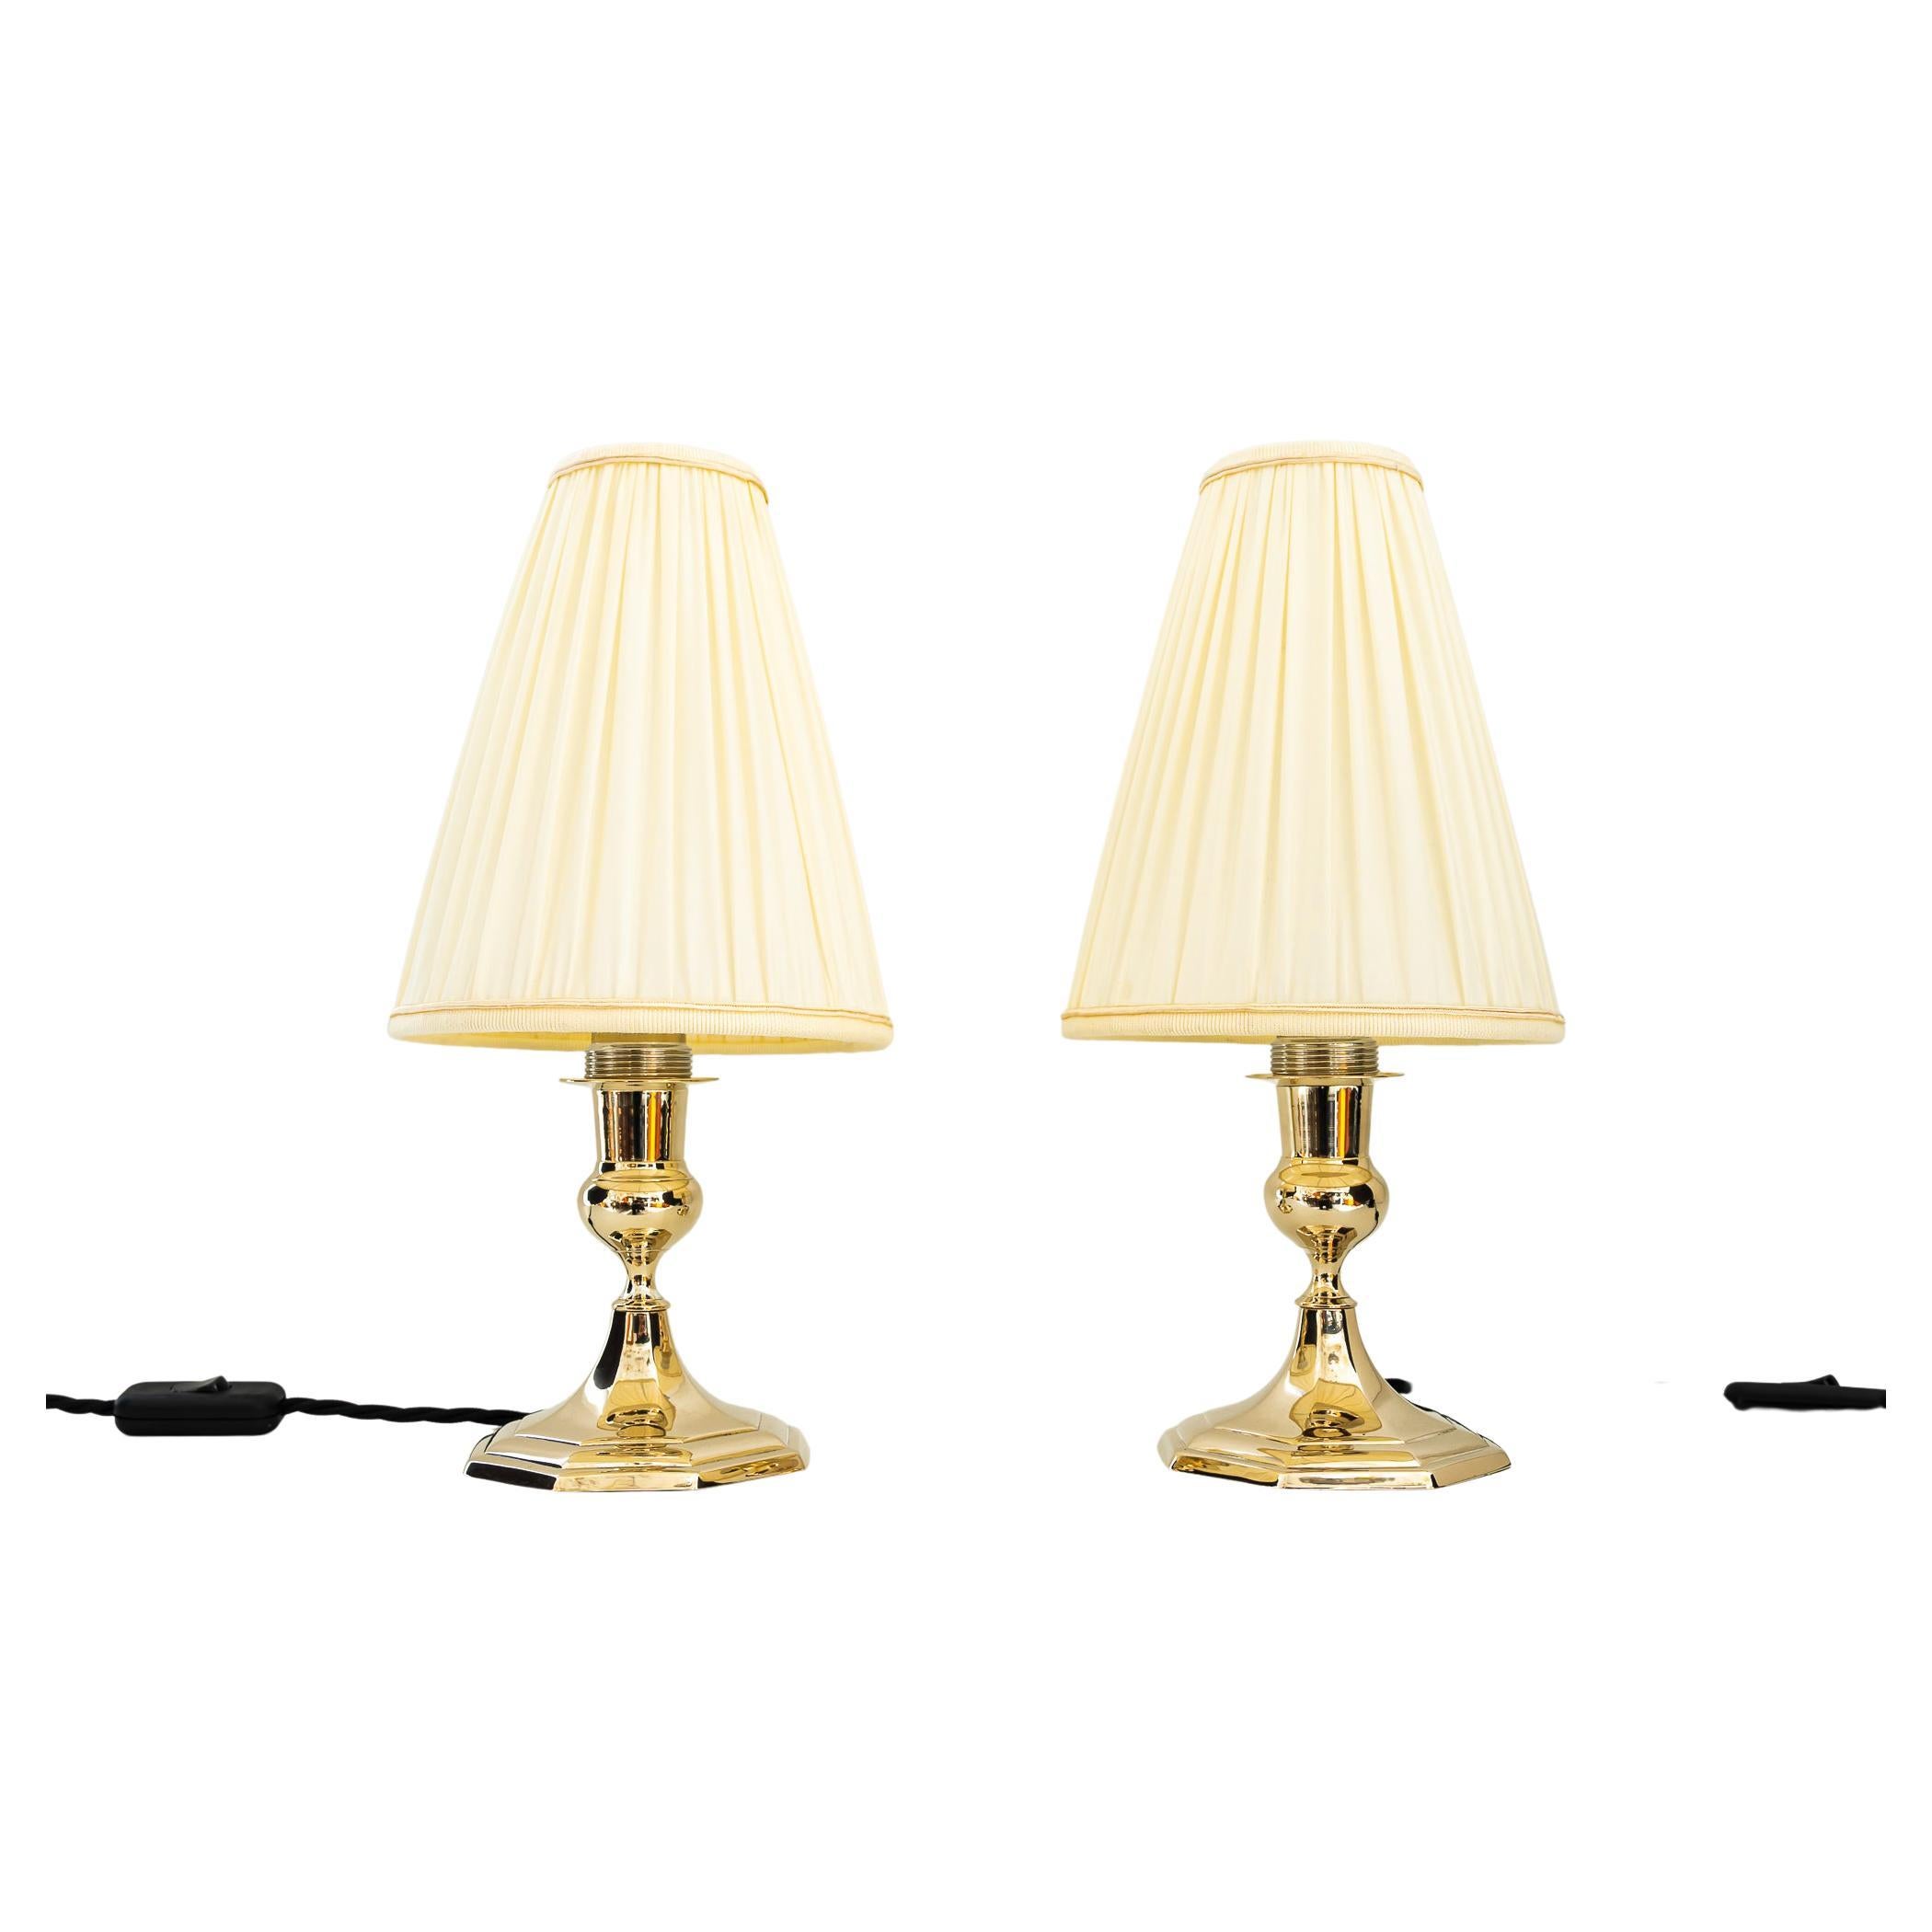 2 Art Deco Table Lamps with Fabric Shades, Vienna, Around 1920s 